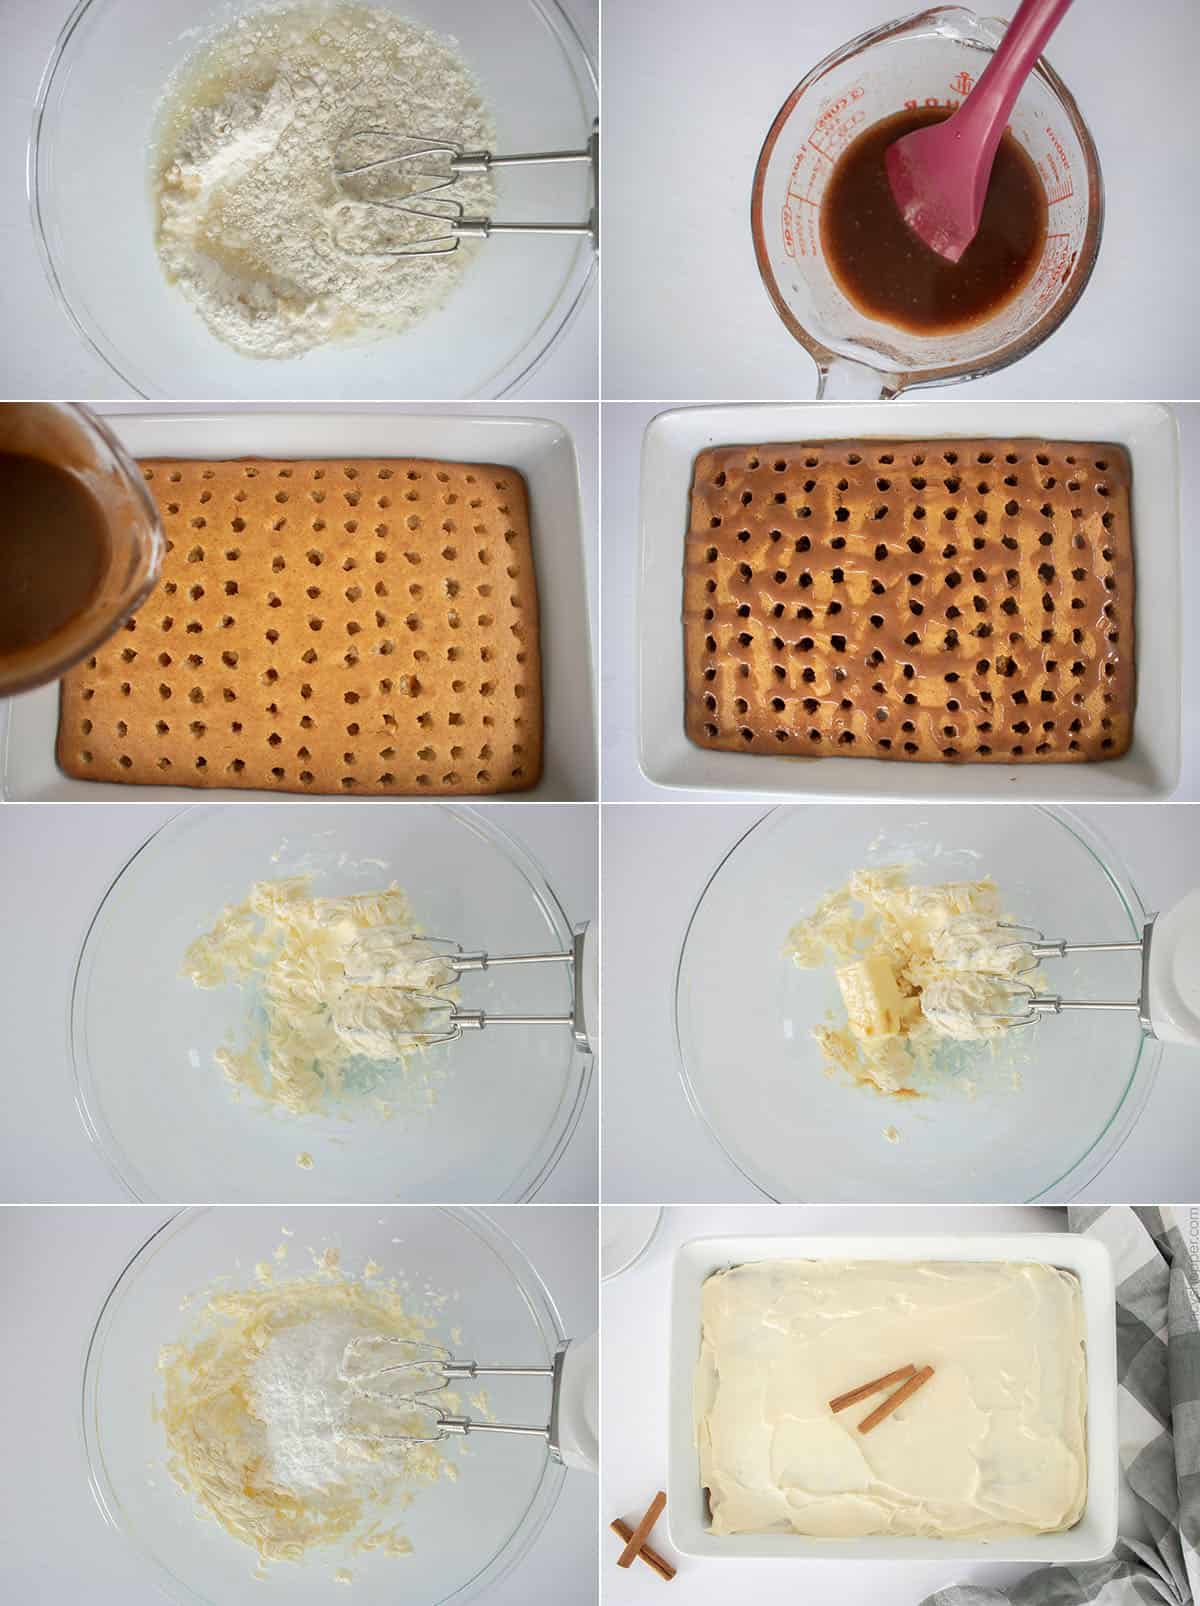 Process for making poke cake with cinnamon.